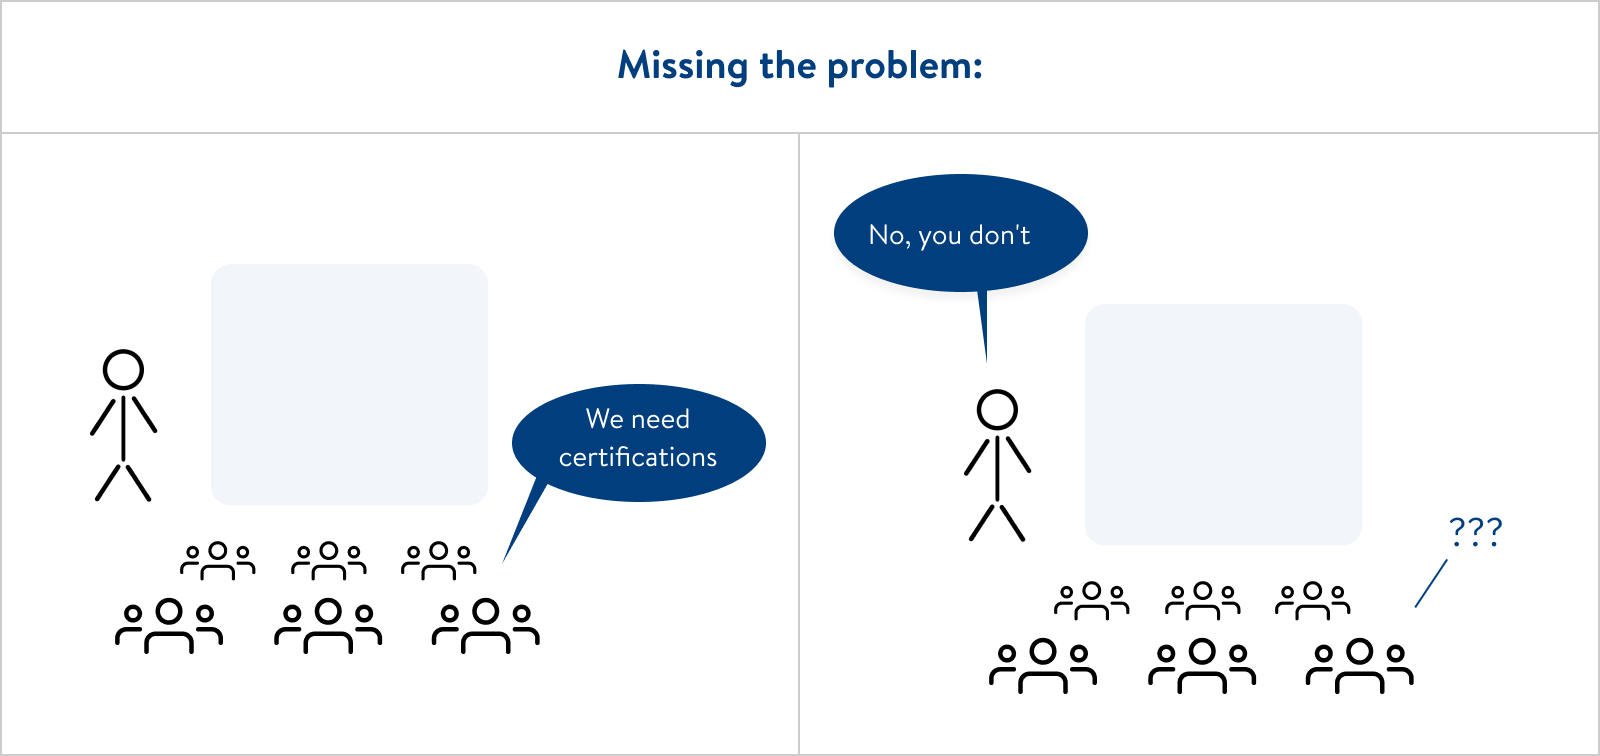 Missing the problem - Audience states: "We need certifications" and you respond "No, you don't."